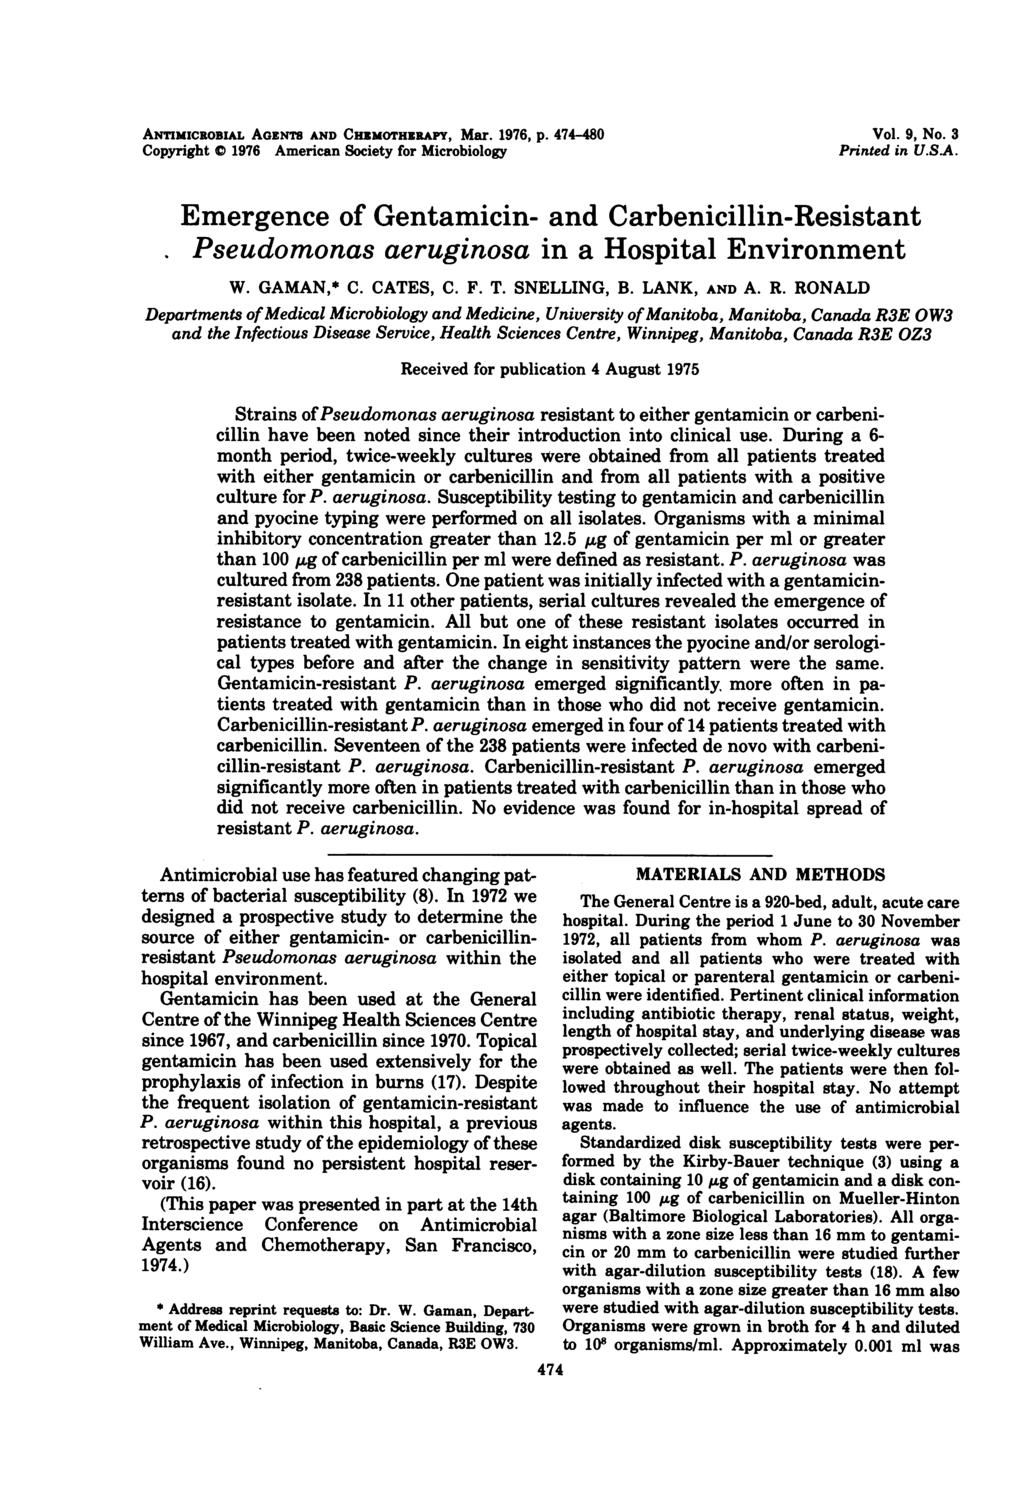 ANTImICROBsuL AGENTS AND CHEMOTHERAPY, Mar. 1976, p. 474-48 Copyright 1976 American Society for Microbiology Vol. 9, No. 3 Printed in U.S.A. Emergence of Gentamicin- and Carbenicillin-Resistant Pseudomonas aeruginosa in a Hospital Environment W.